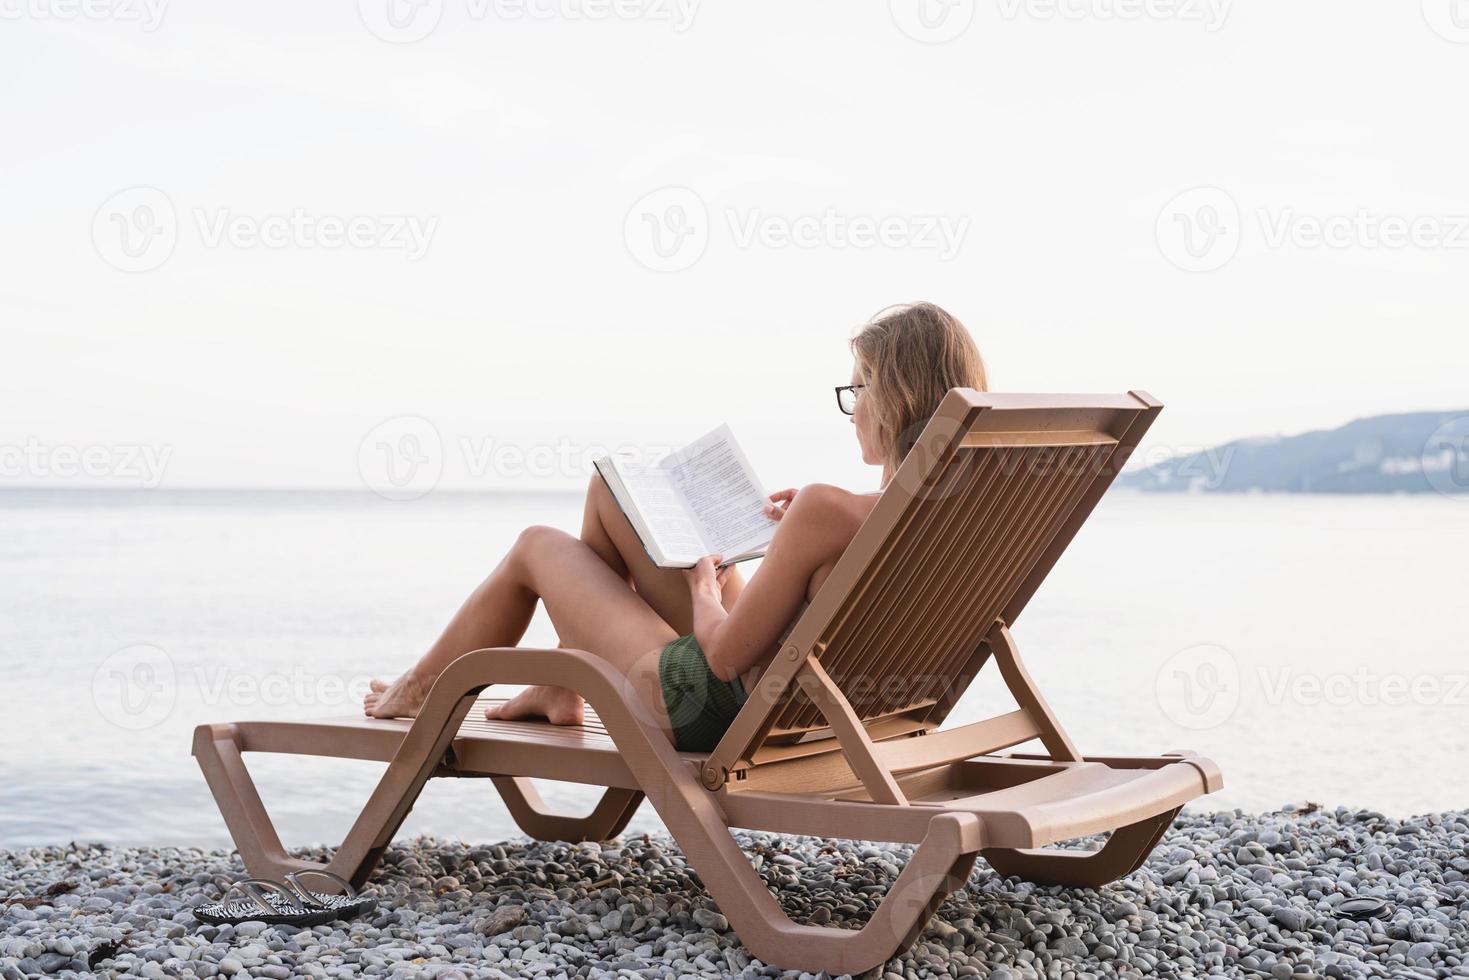 The beautiful young woman sitting on the sun lounger reading a book photo